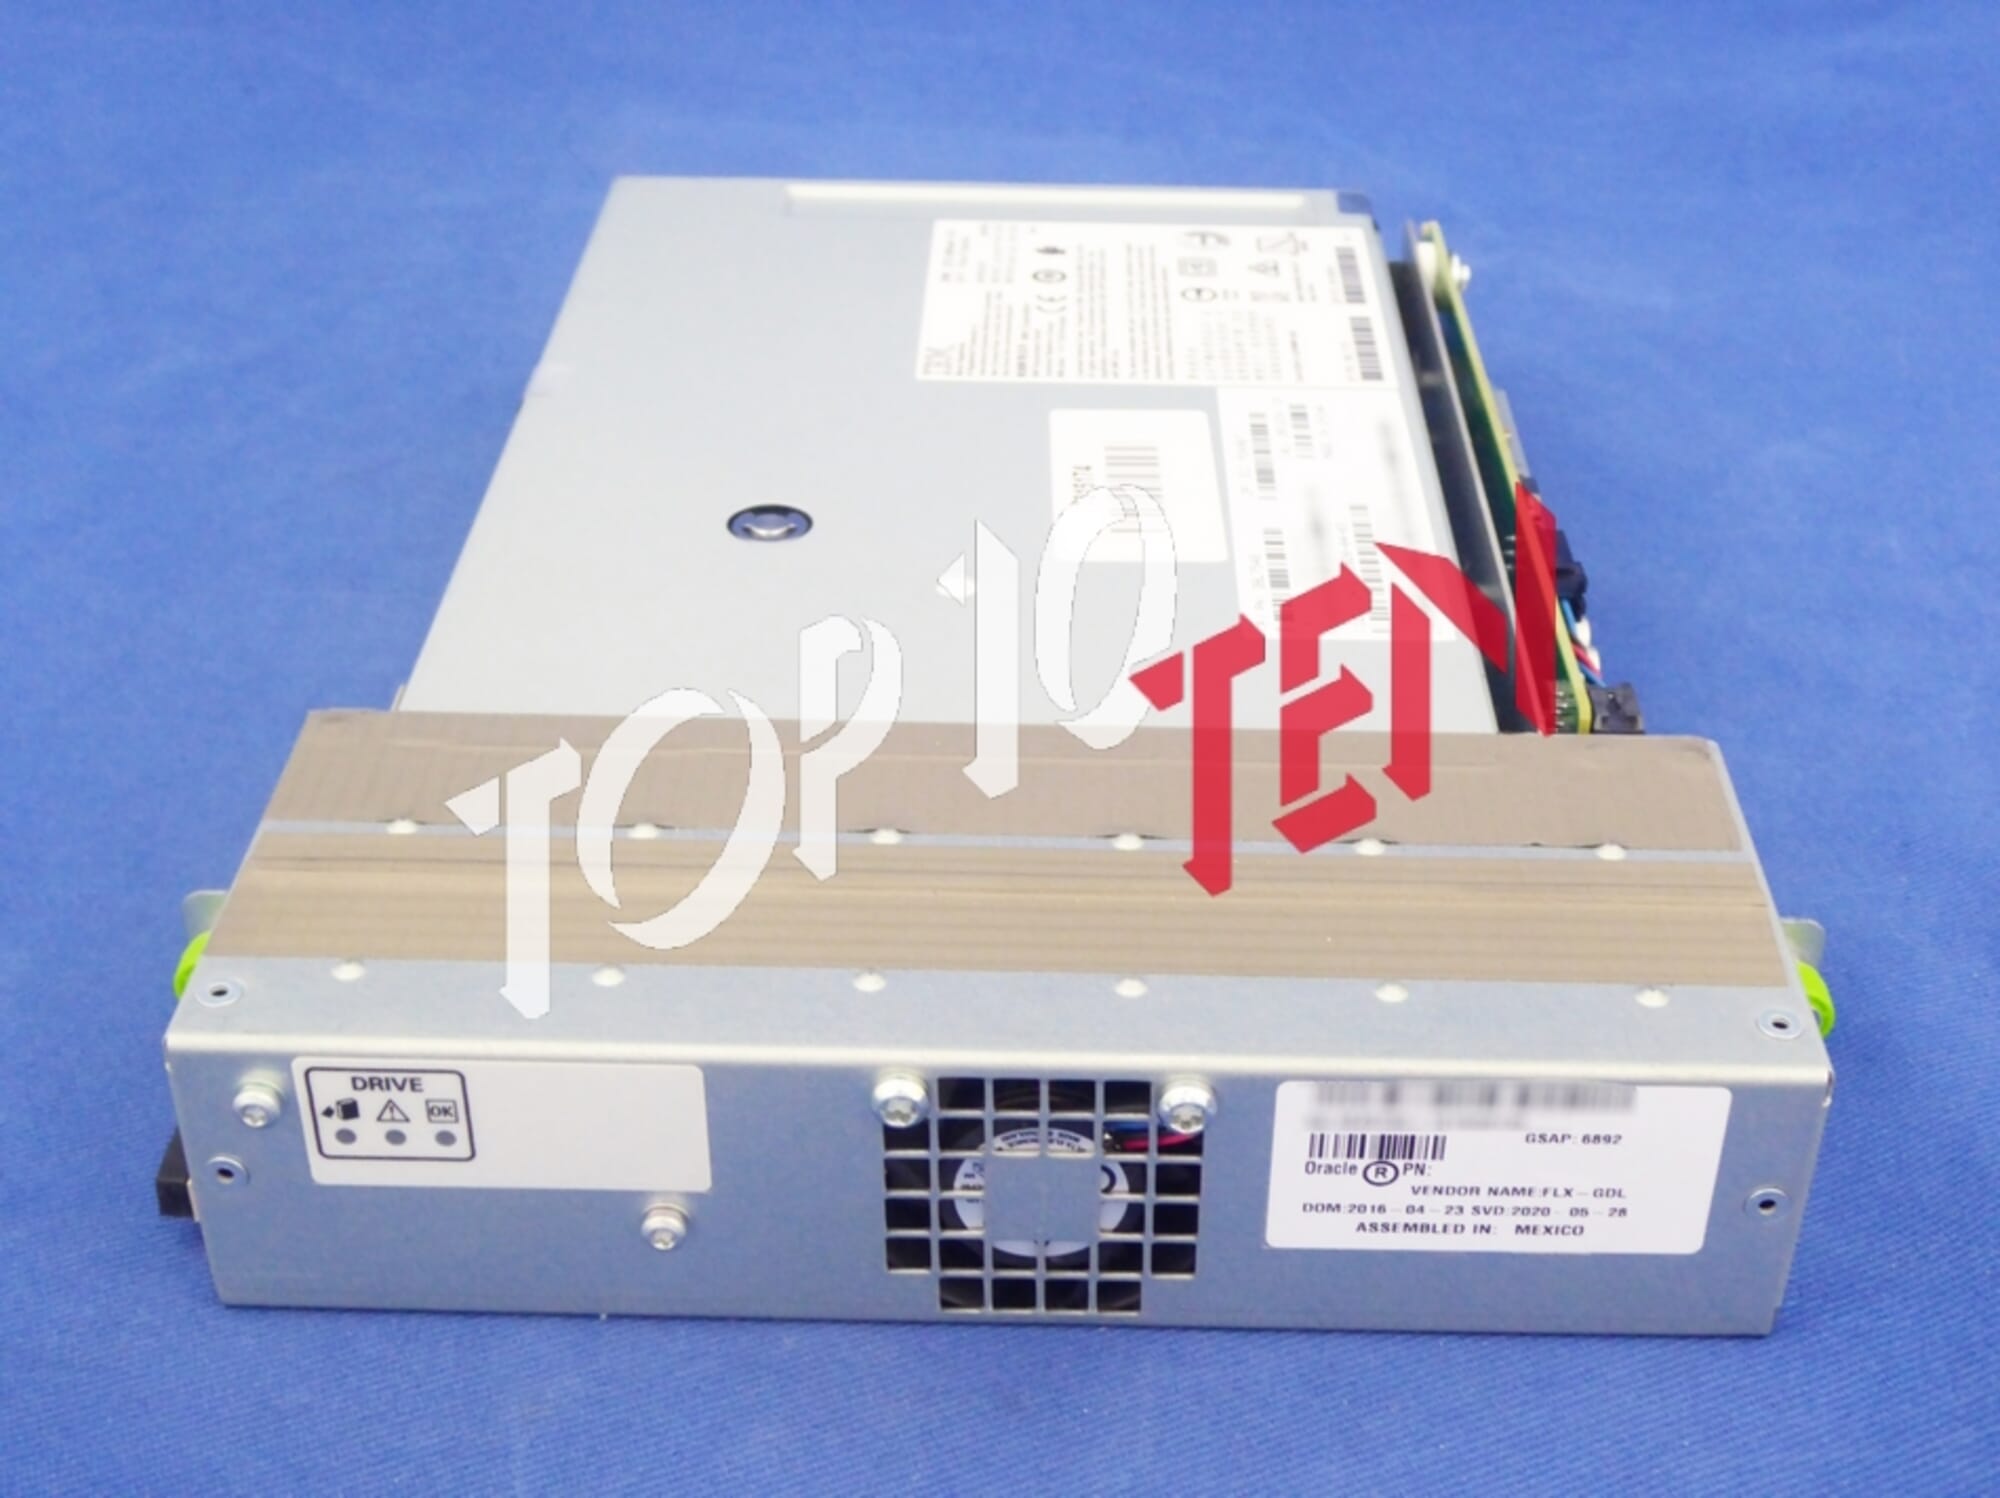 Oracle 7316627 LTO-7 HH FC 8Gb Tape Drive with Caddy for SL150 